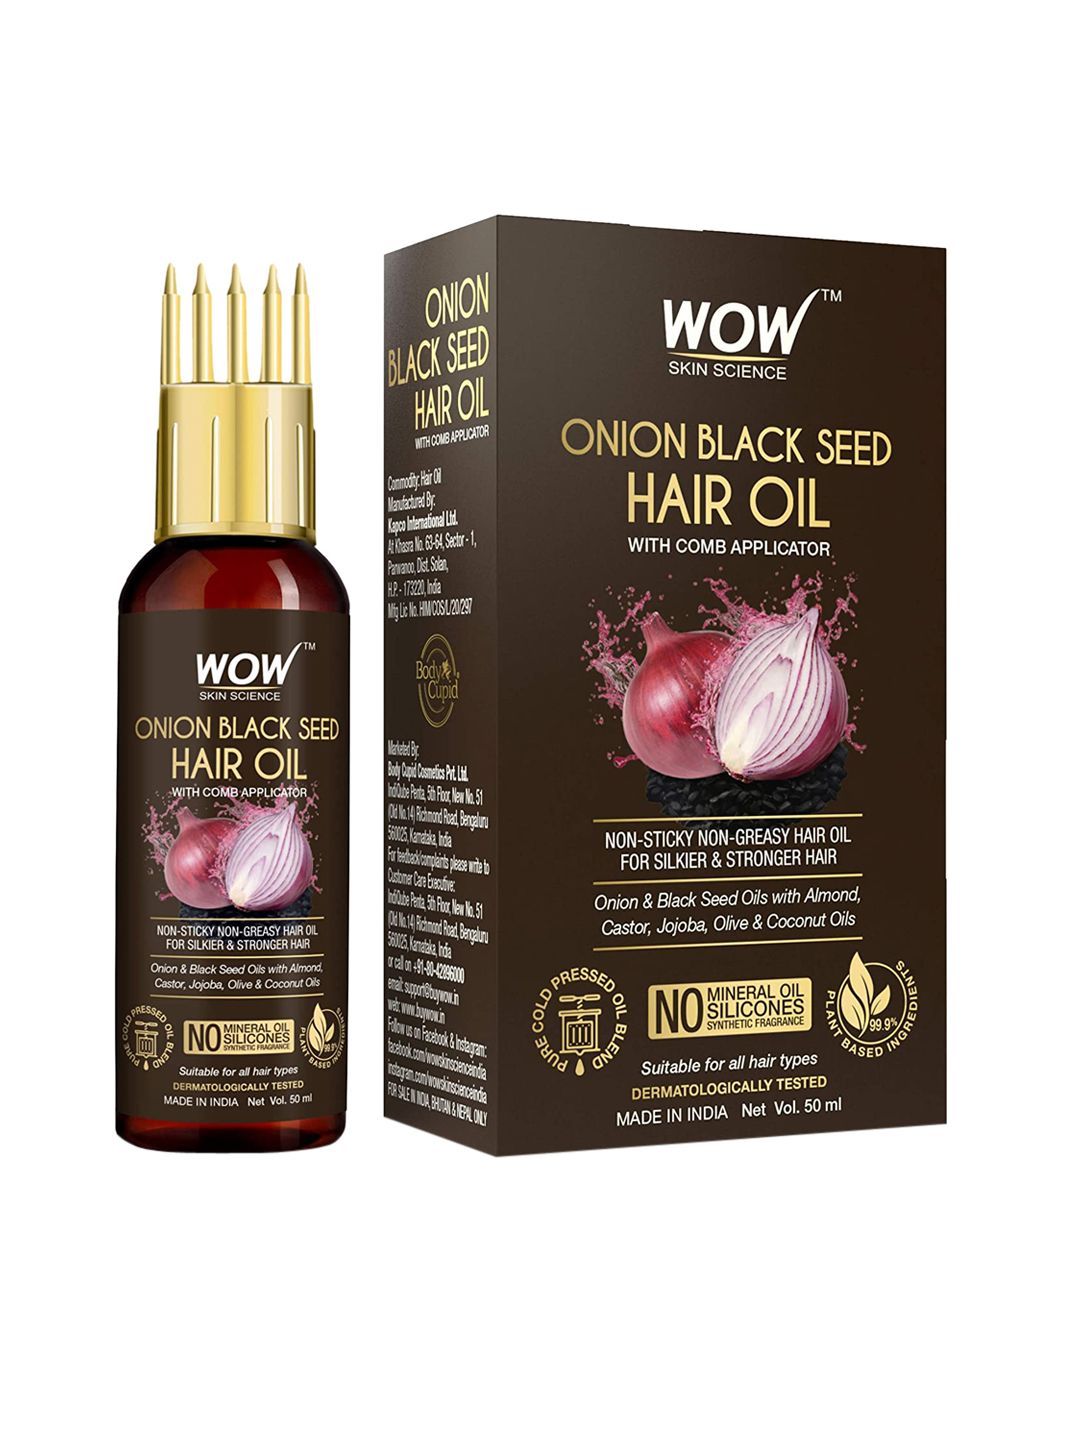 WOW Skin Science Onion Black Seed Hair Oil With Comb Applicator - 50 ml Price in India